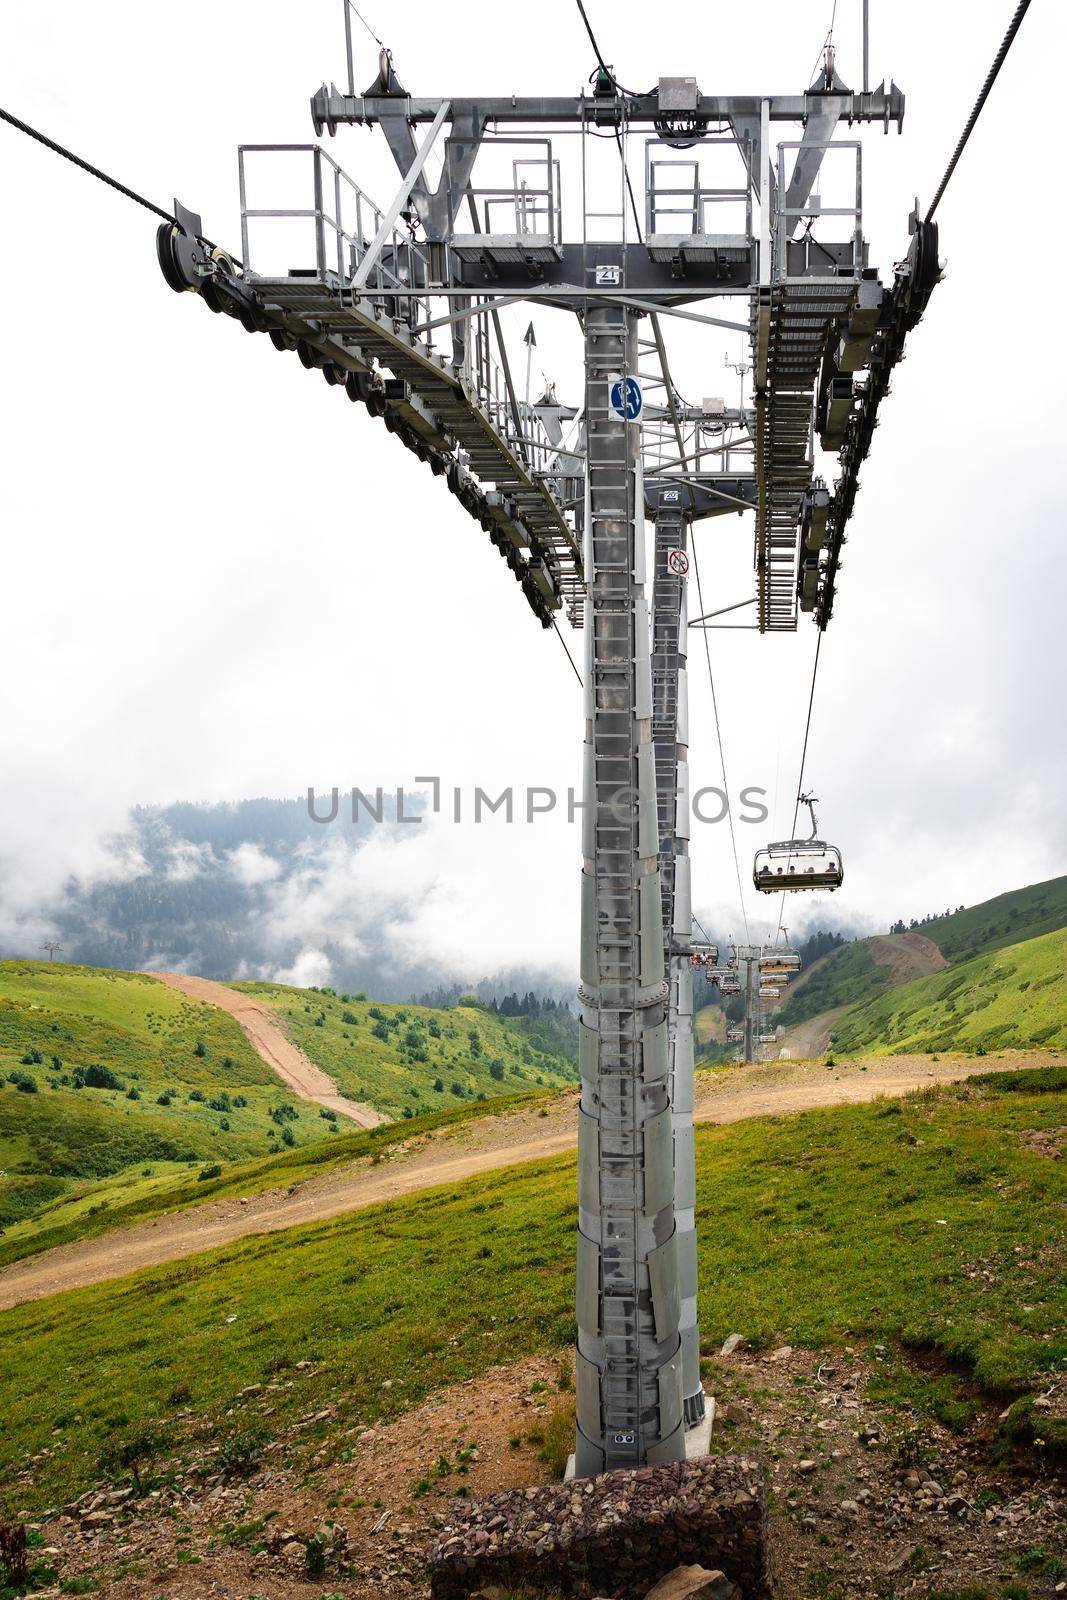 Chairlift in ski mountain resort at summer time by Fabrikasimf